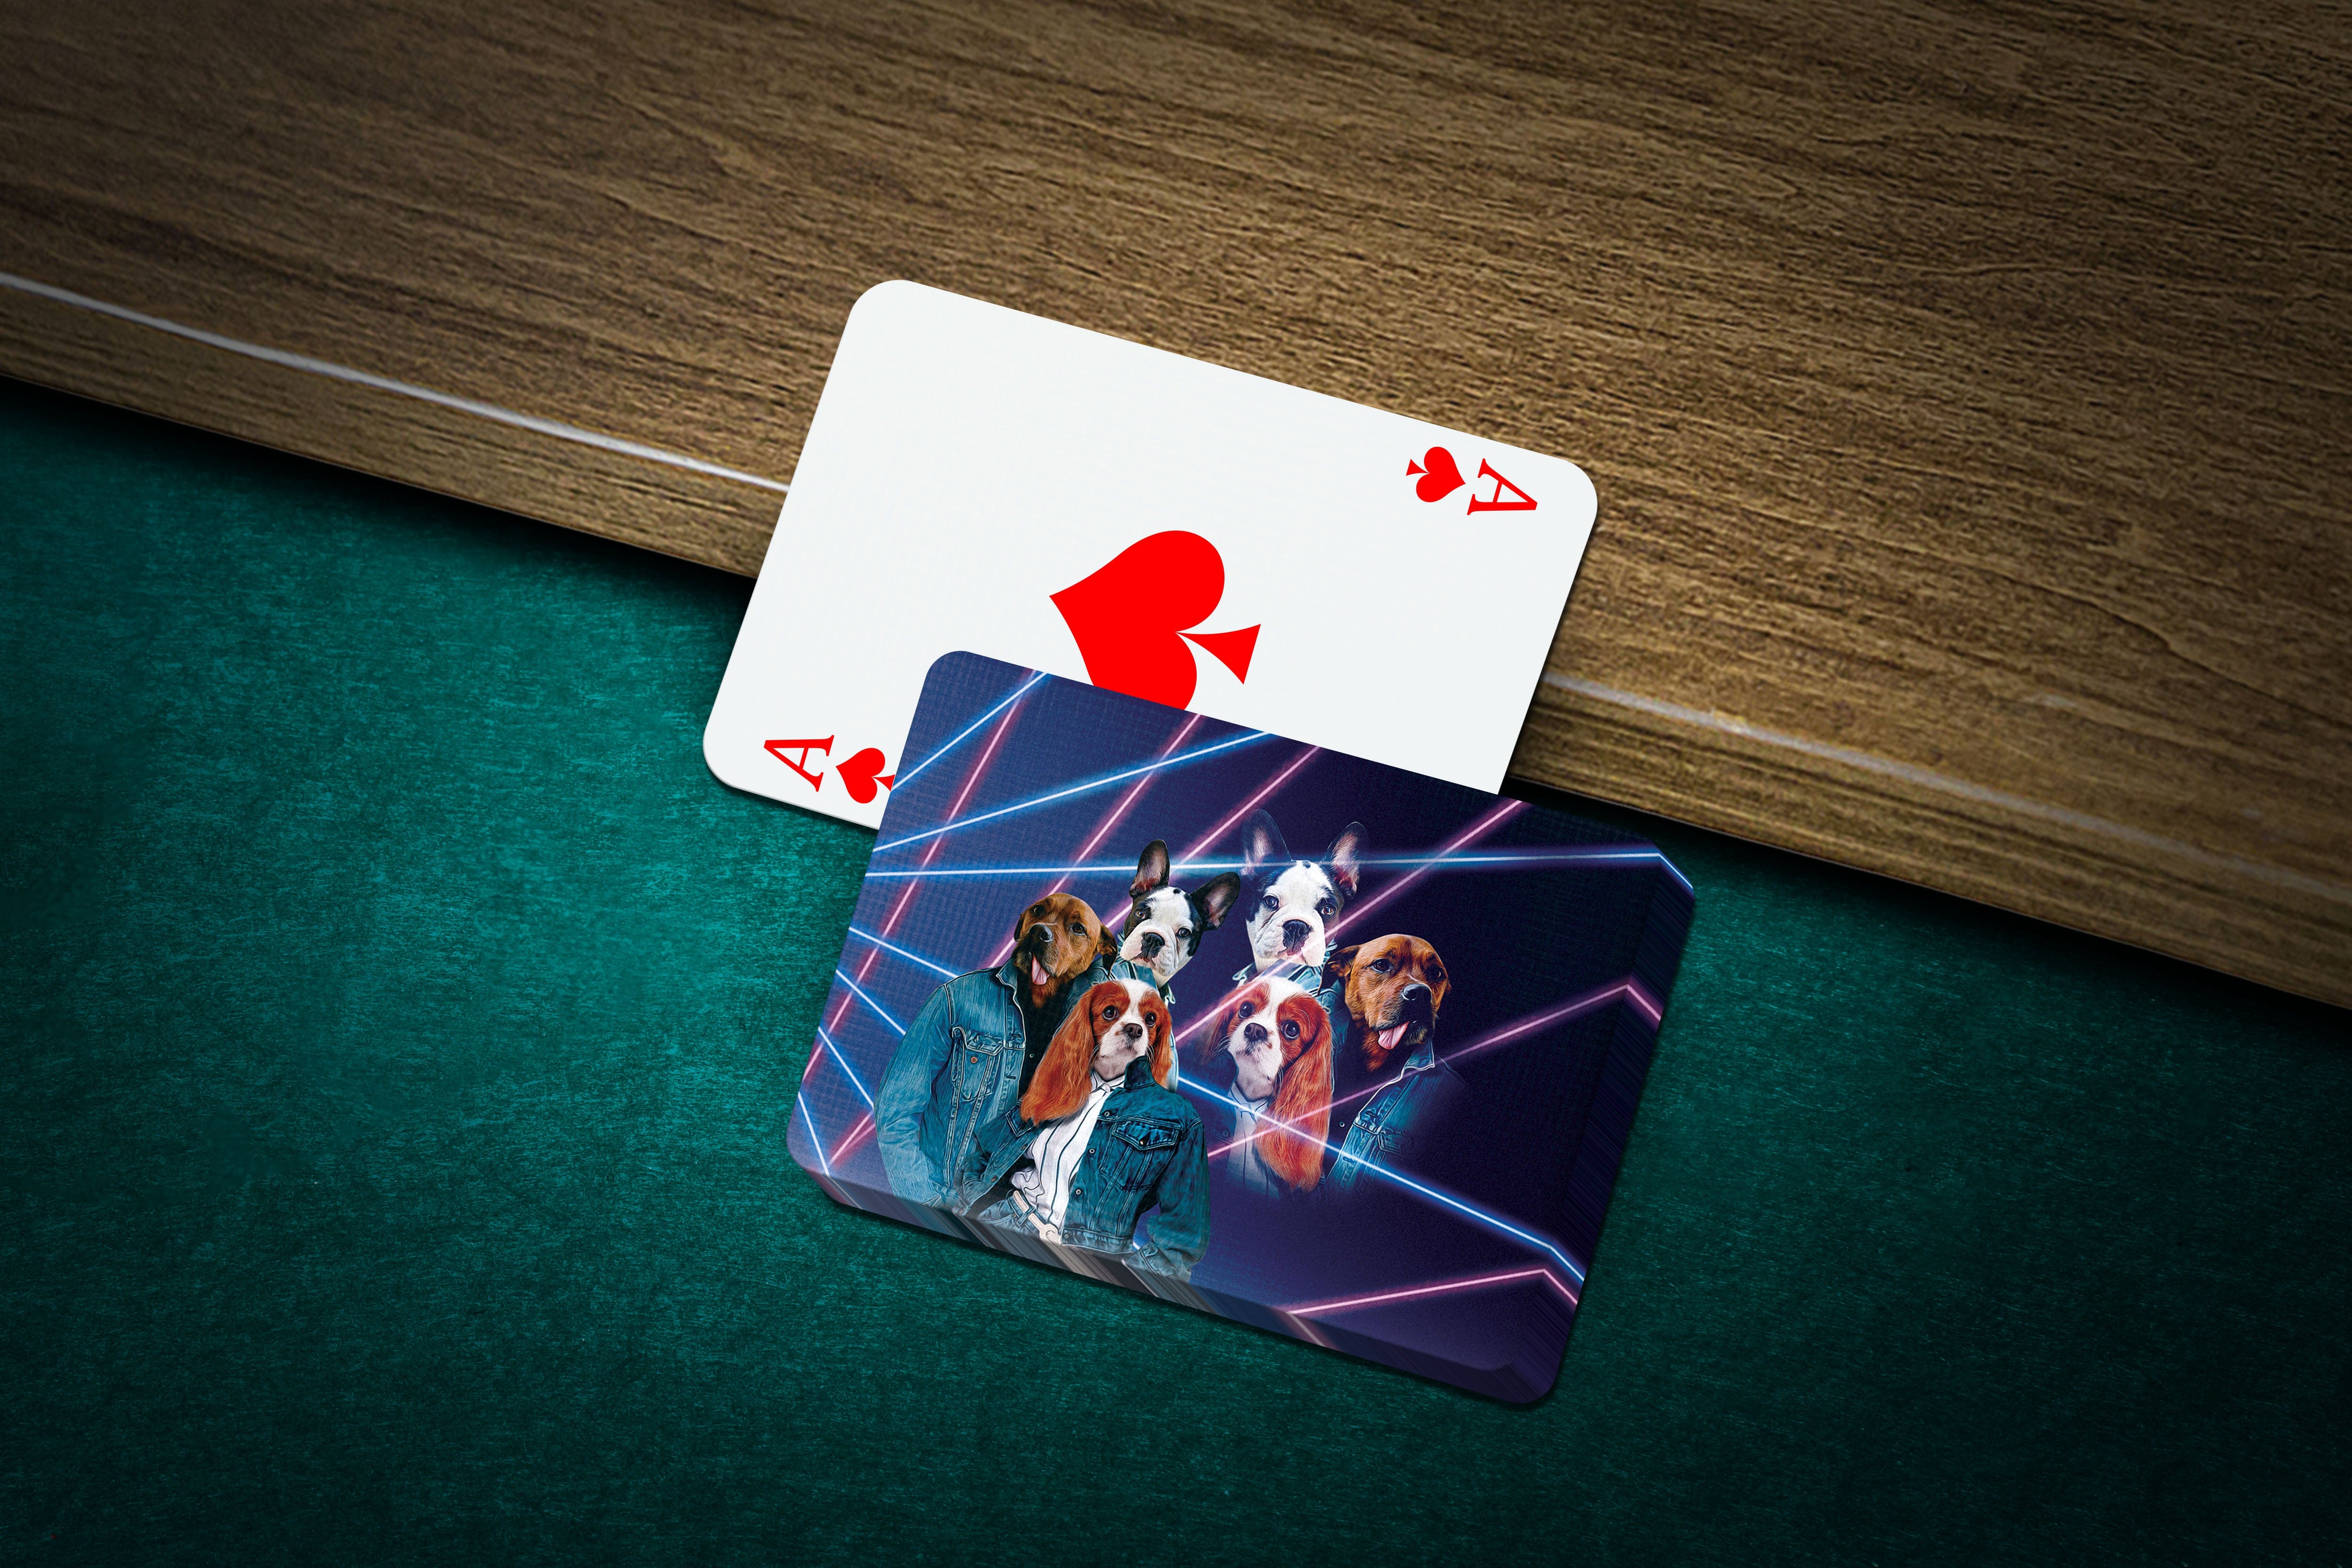 &#39;1980s Lazer Portrait (2 Females/1 Male)&#39; Personalized 3 Pet Playing Cards